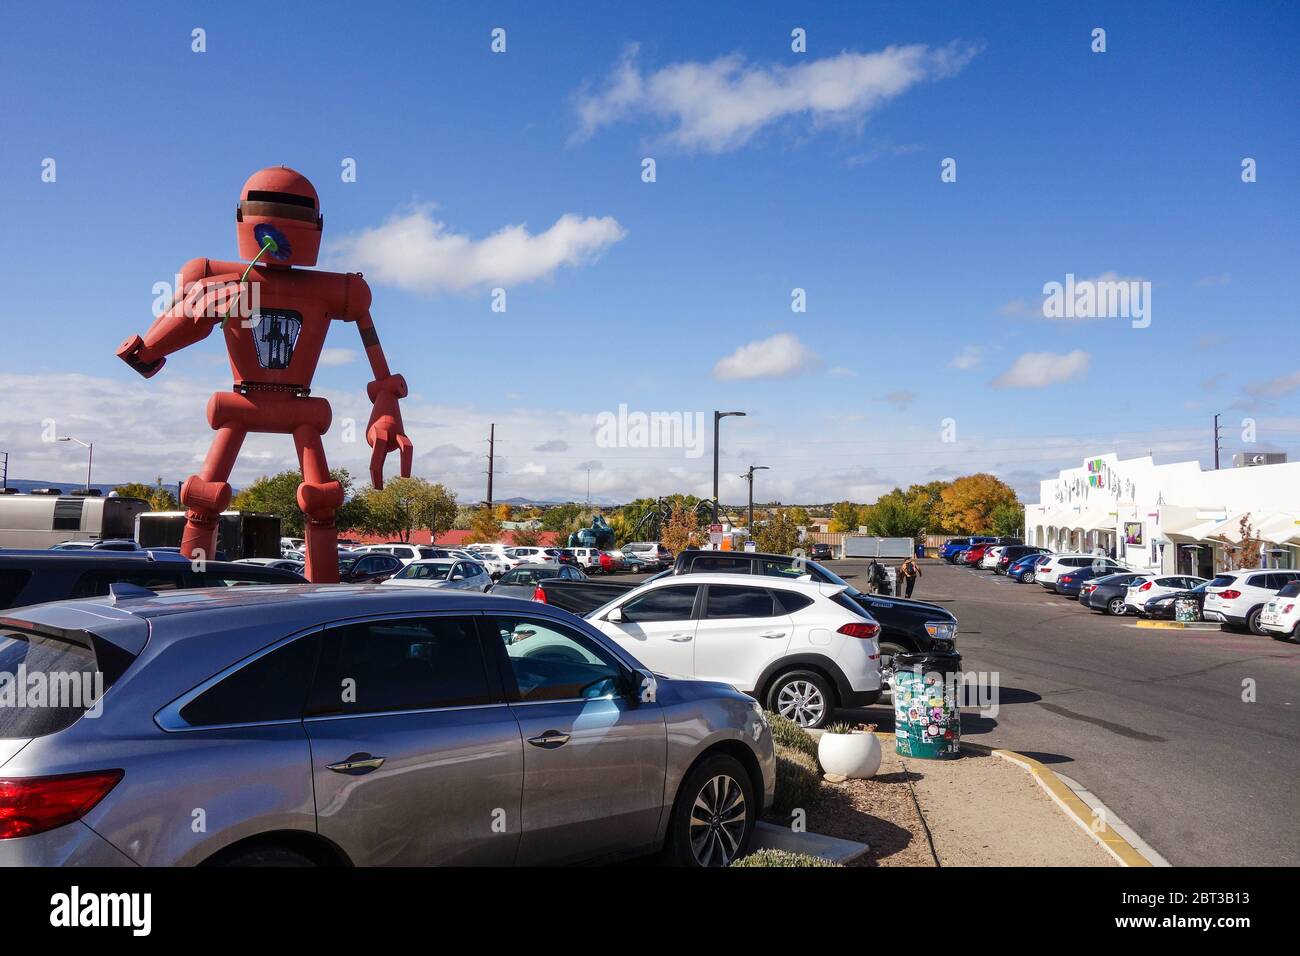 Robot in front of Meow Wolf art installation in Santa Fe, NM Stock Photo